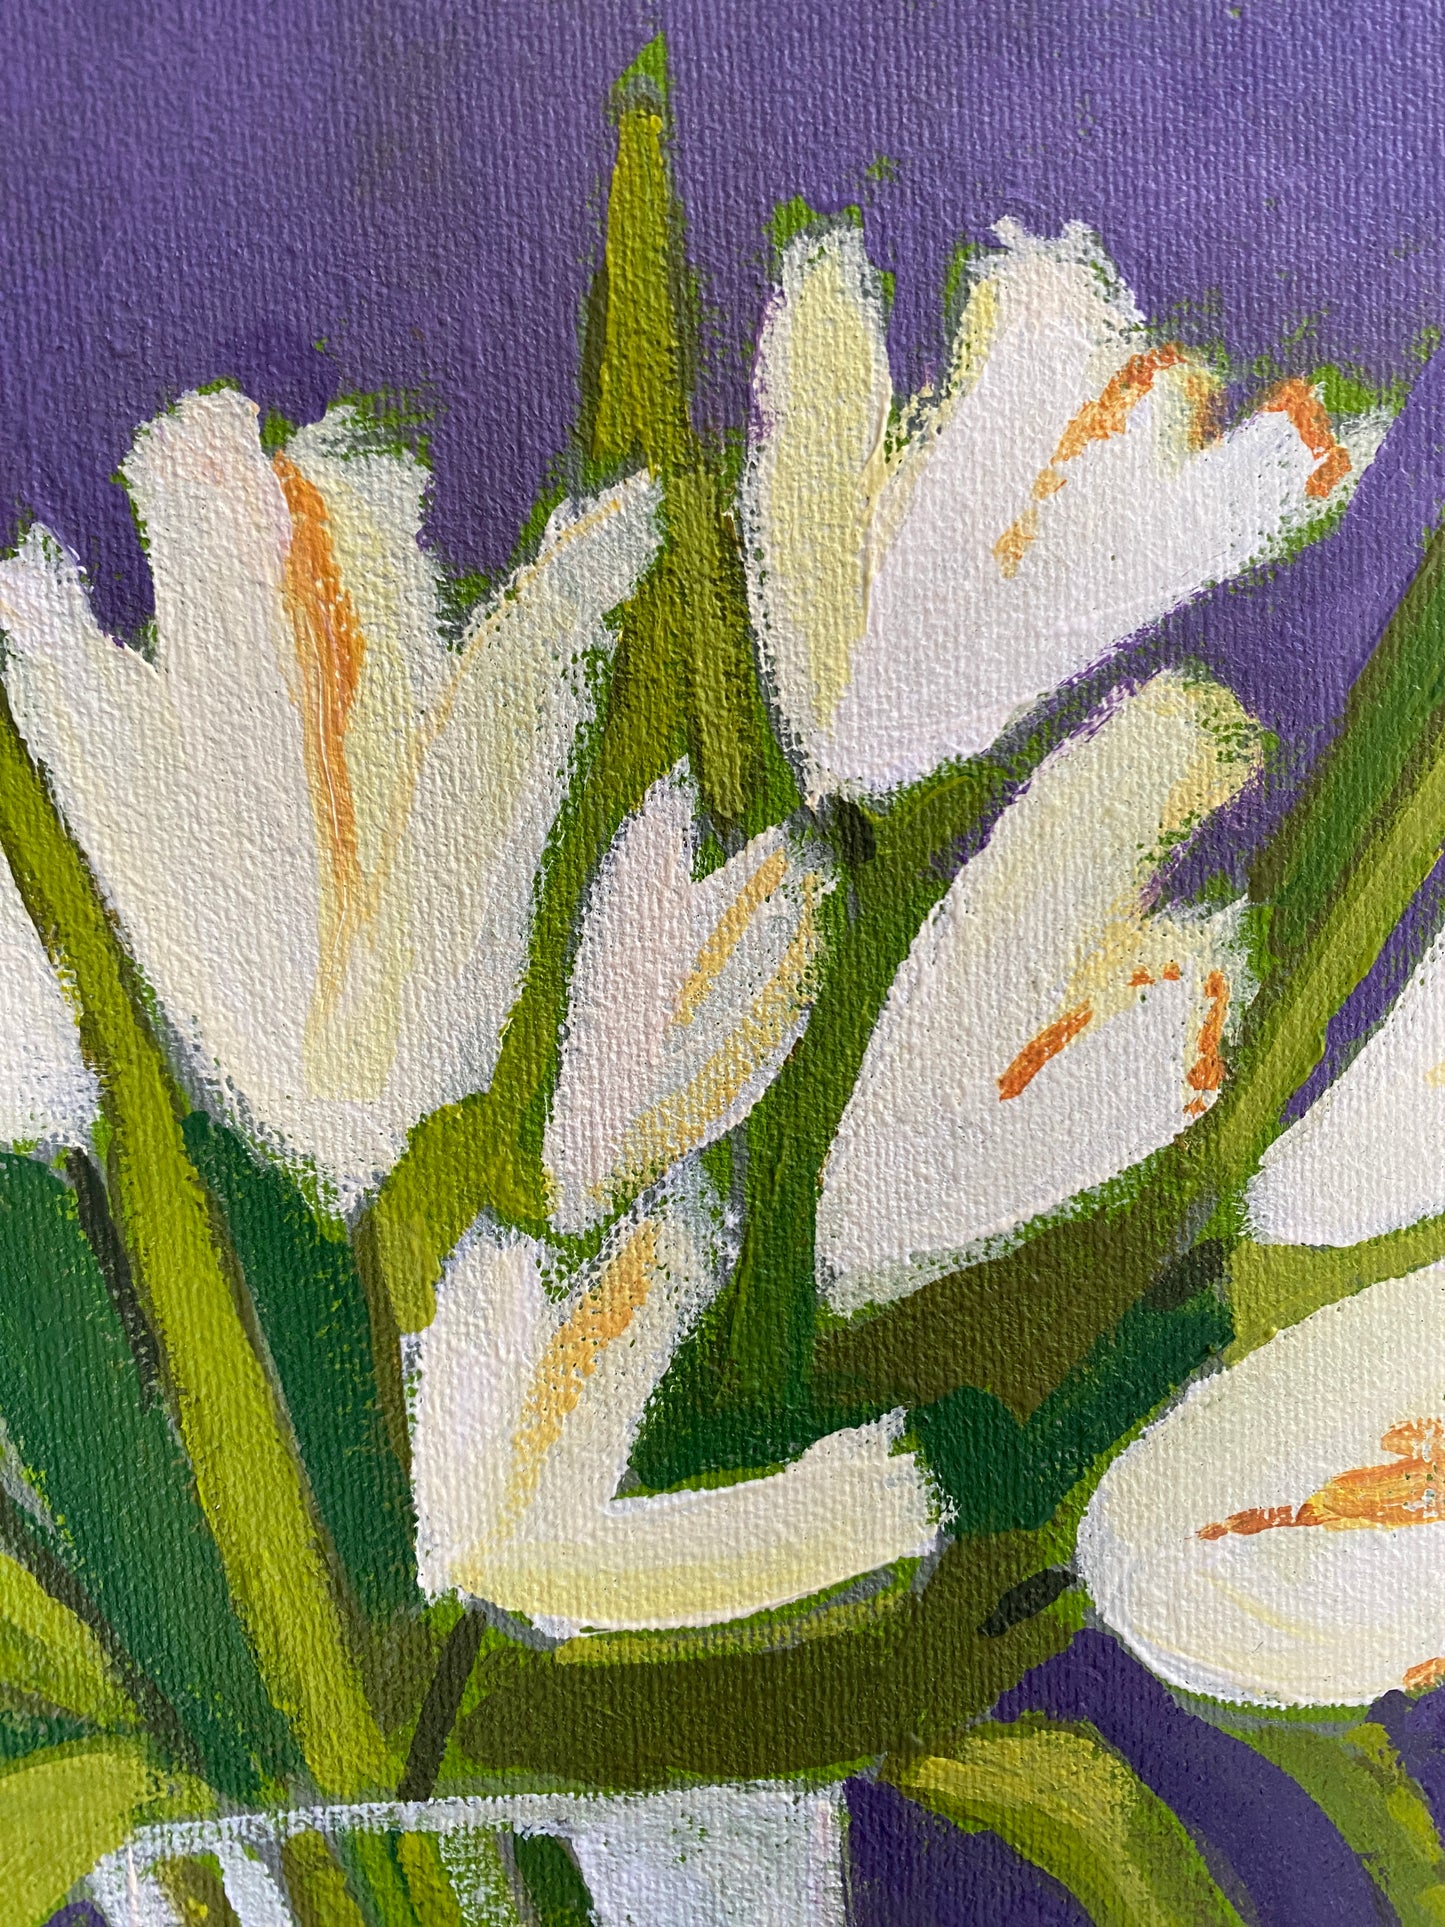 Original Art / White Tulips with Purple / Wall Art on Canvas / Floral / Botanical / Canadian Art Gallery